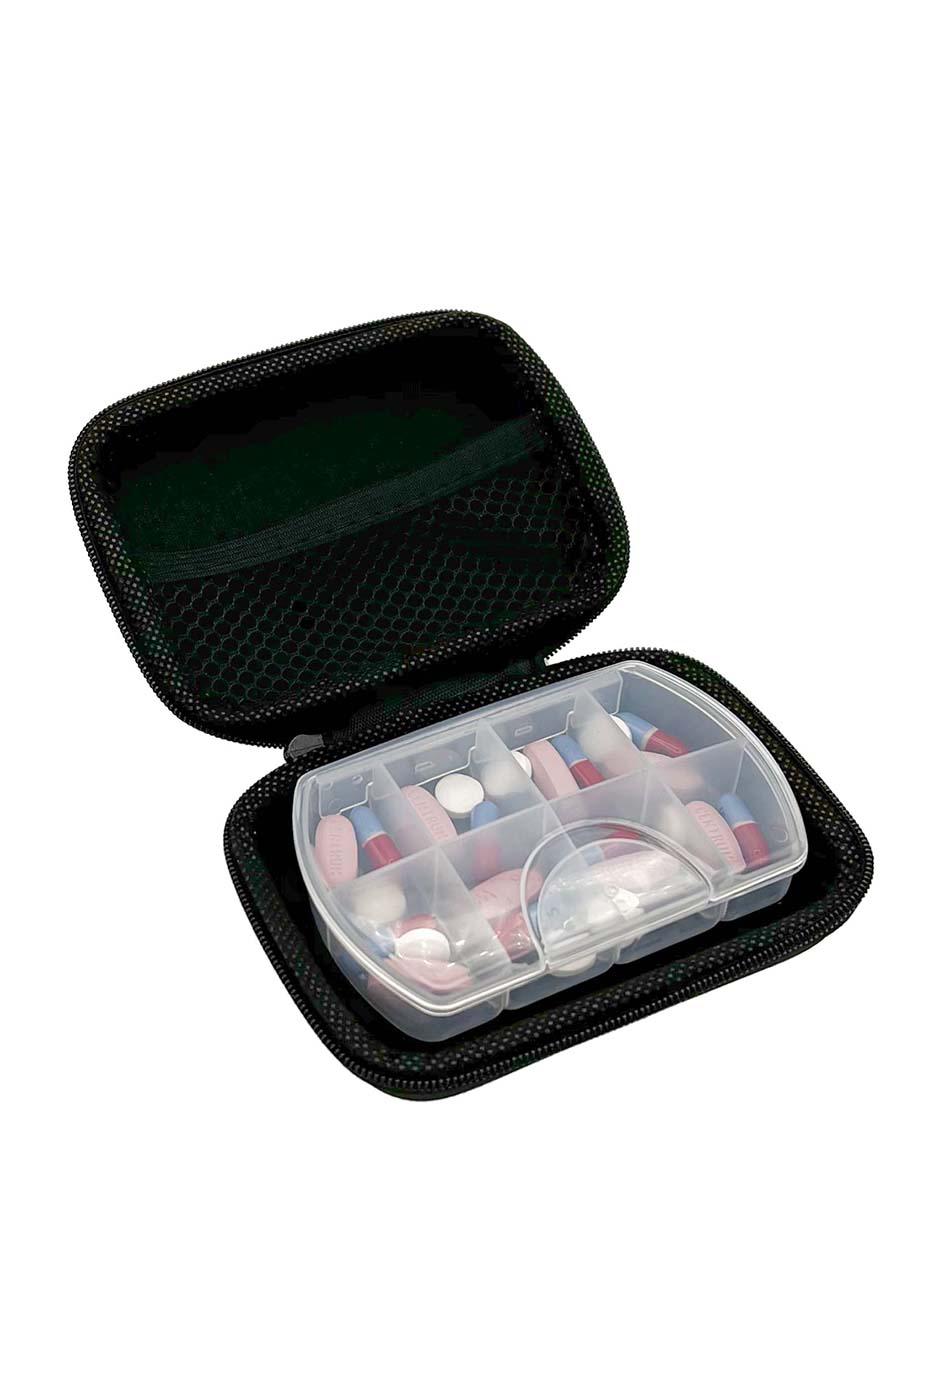 Ezy Dose Travel Pill Container; image 2 of 4